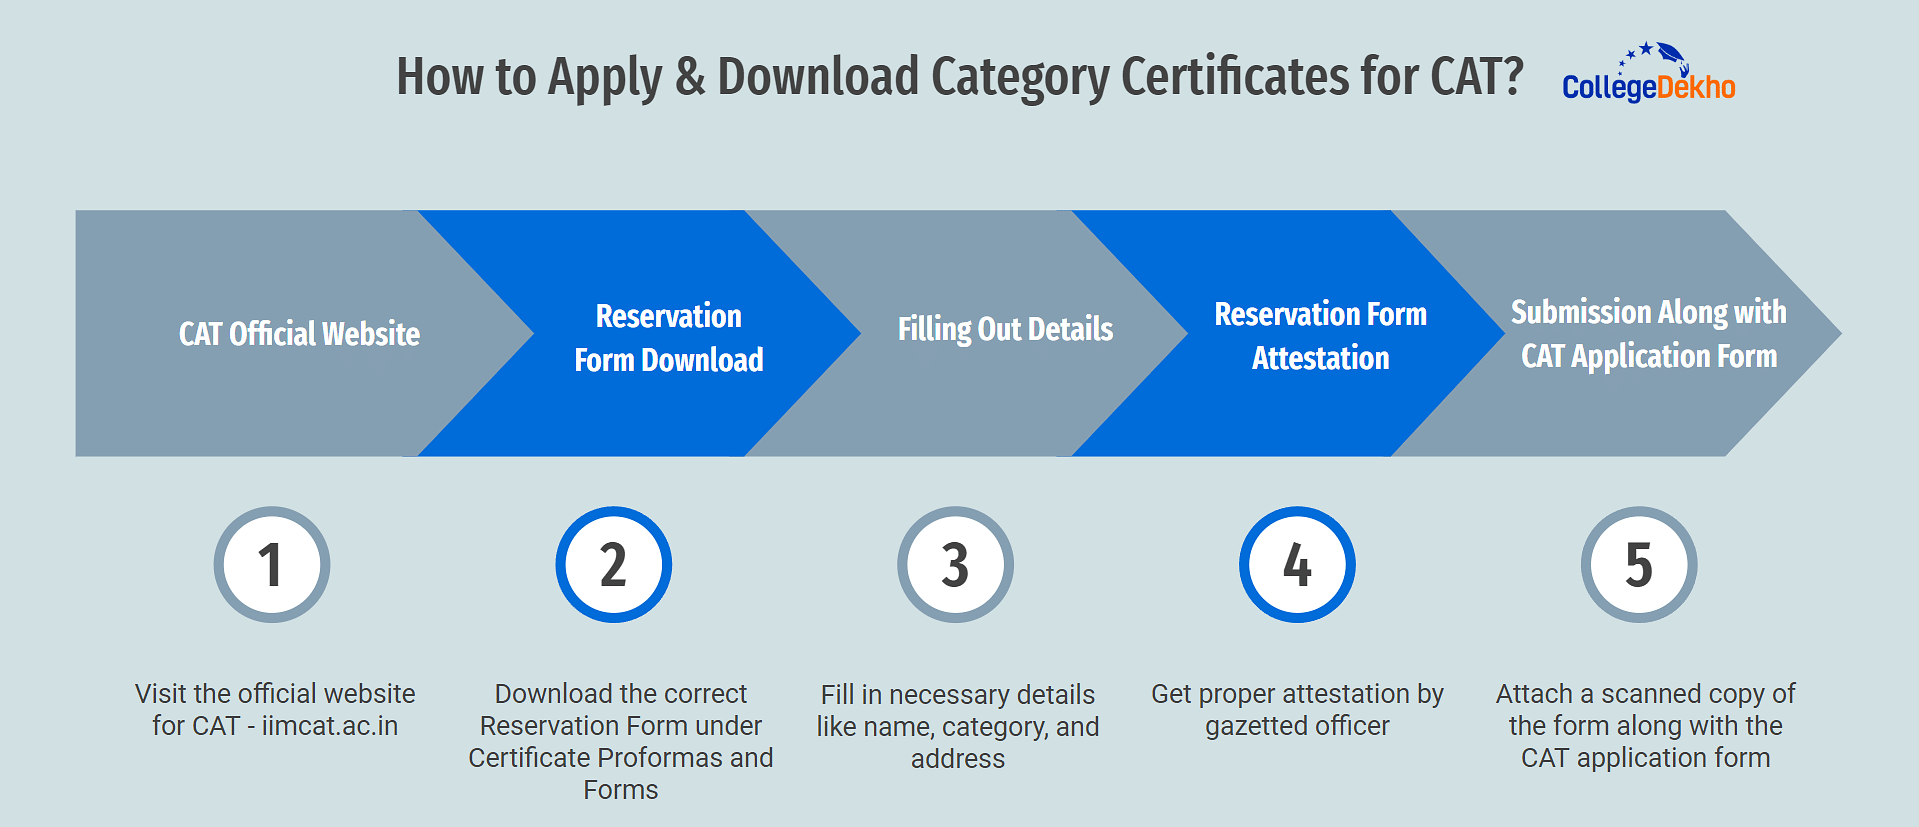 How to Apply & Download Category Certificate for CAT